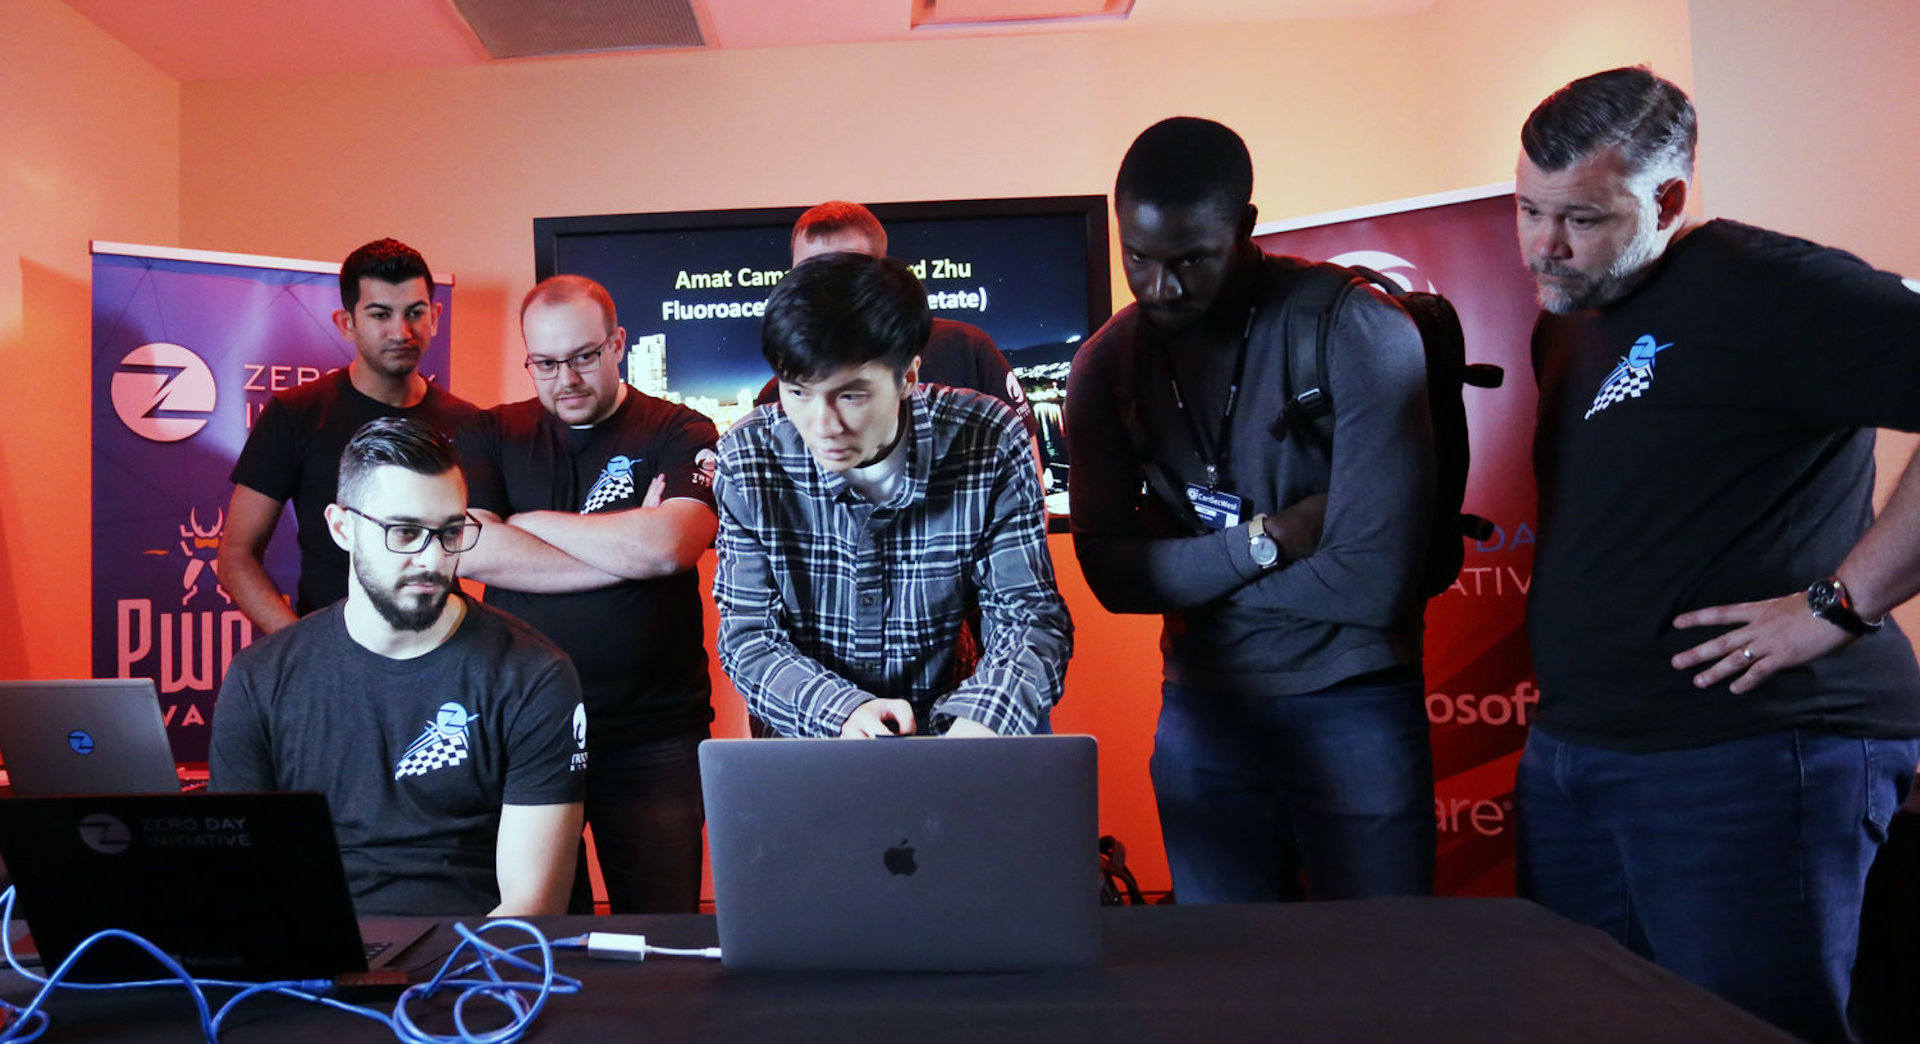 hackerone,-verizon-media-weigh-pros-and-cons-of-making-live-hacking-contests-virtual